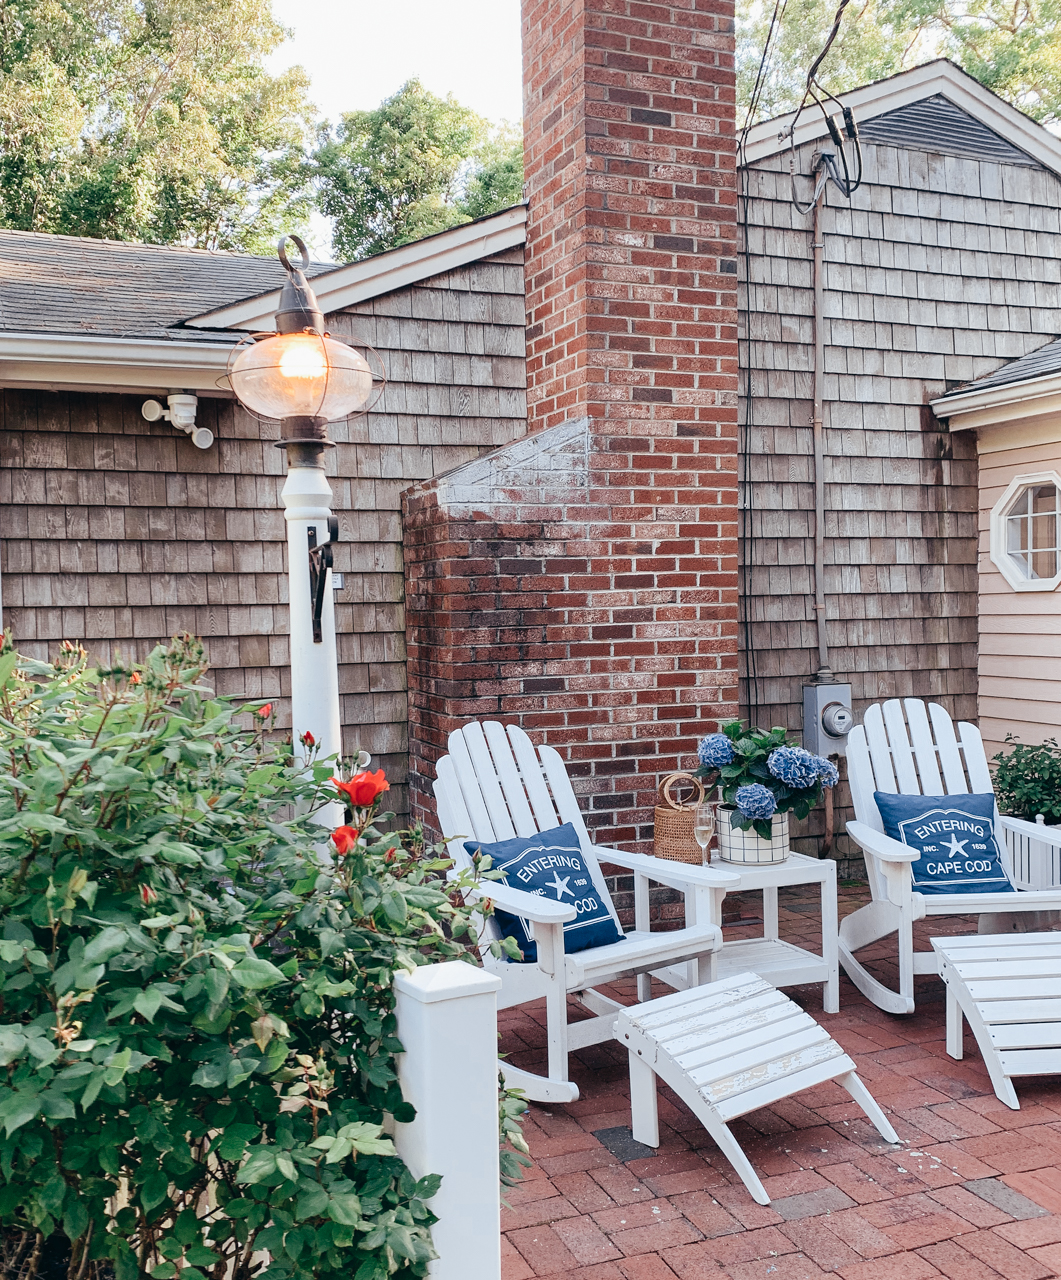 Cape So Hard: the Ultimate Cape Cod Vacation Home, a review featured by top US travel blogger, Shannon Shipman